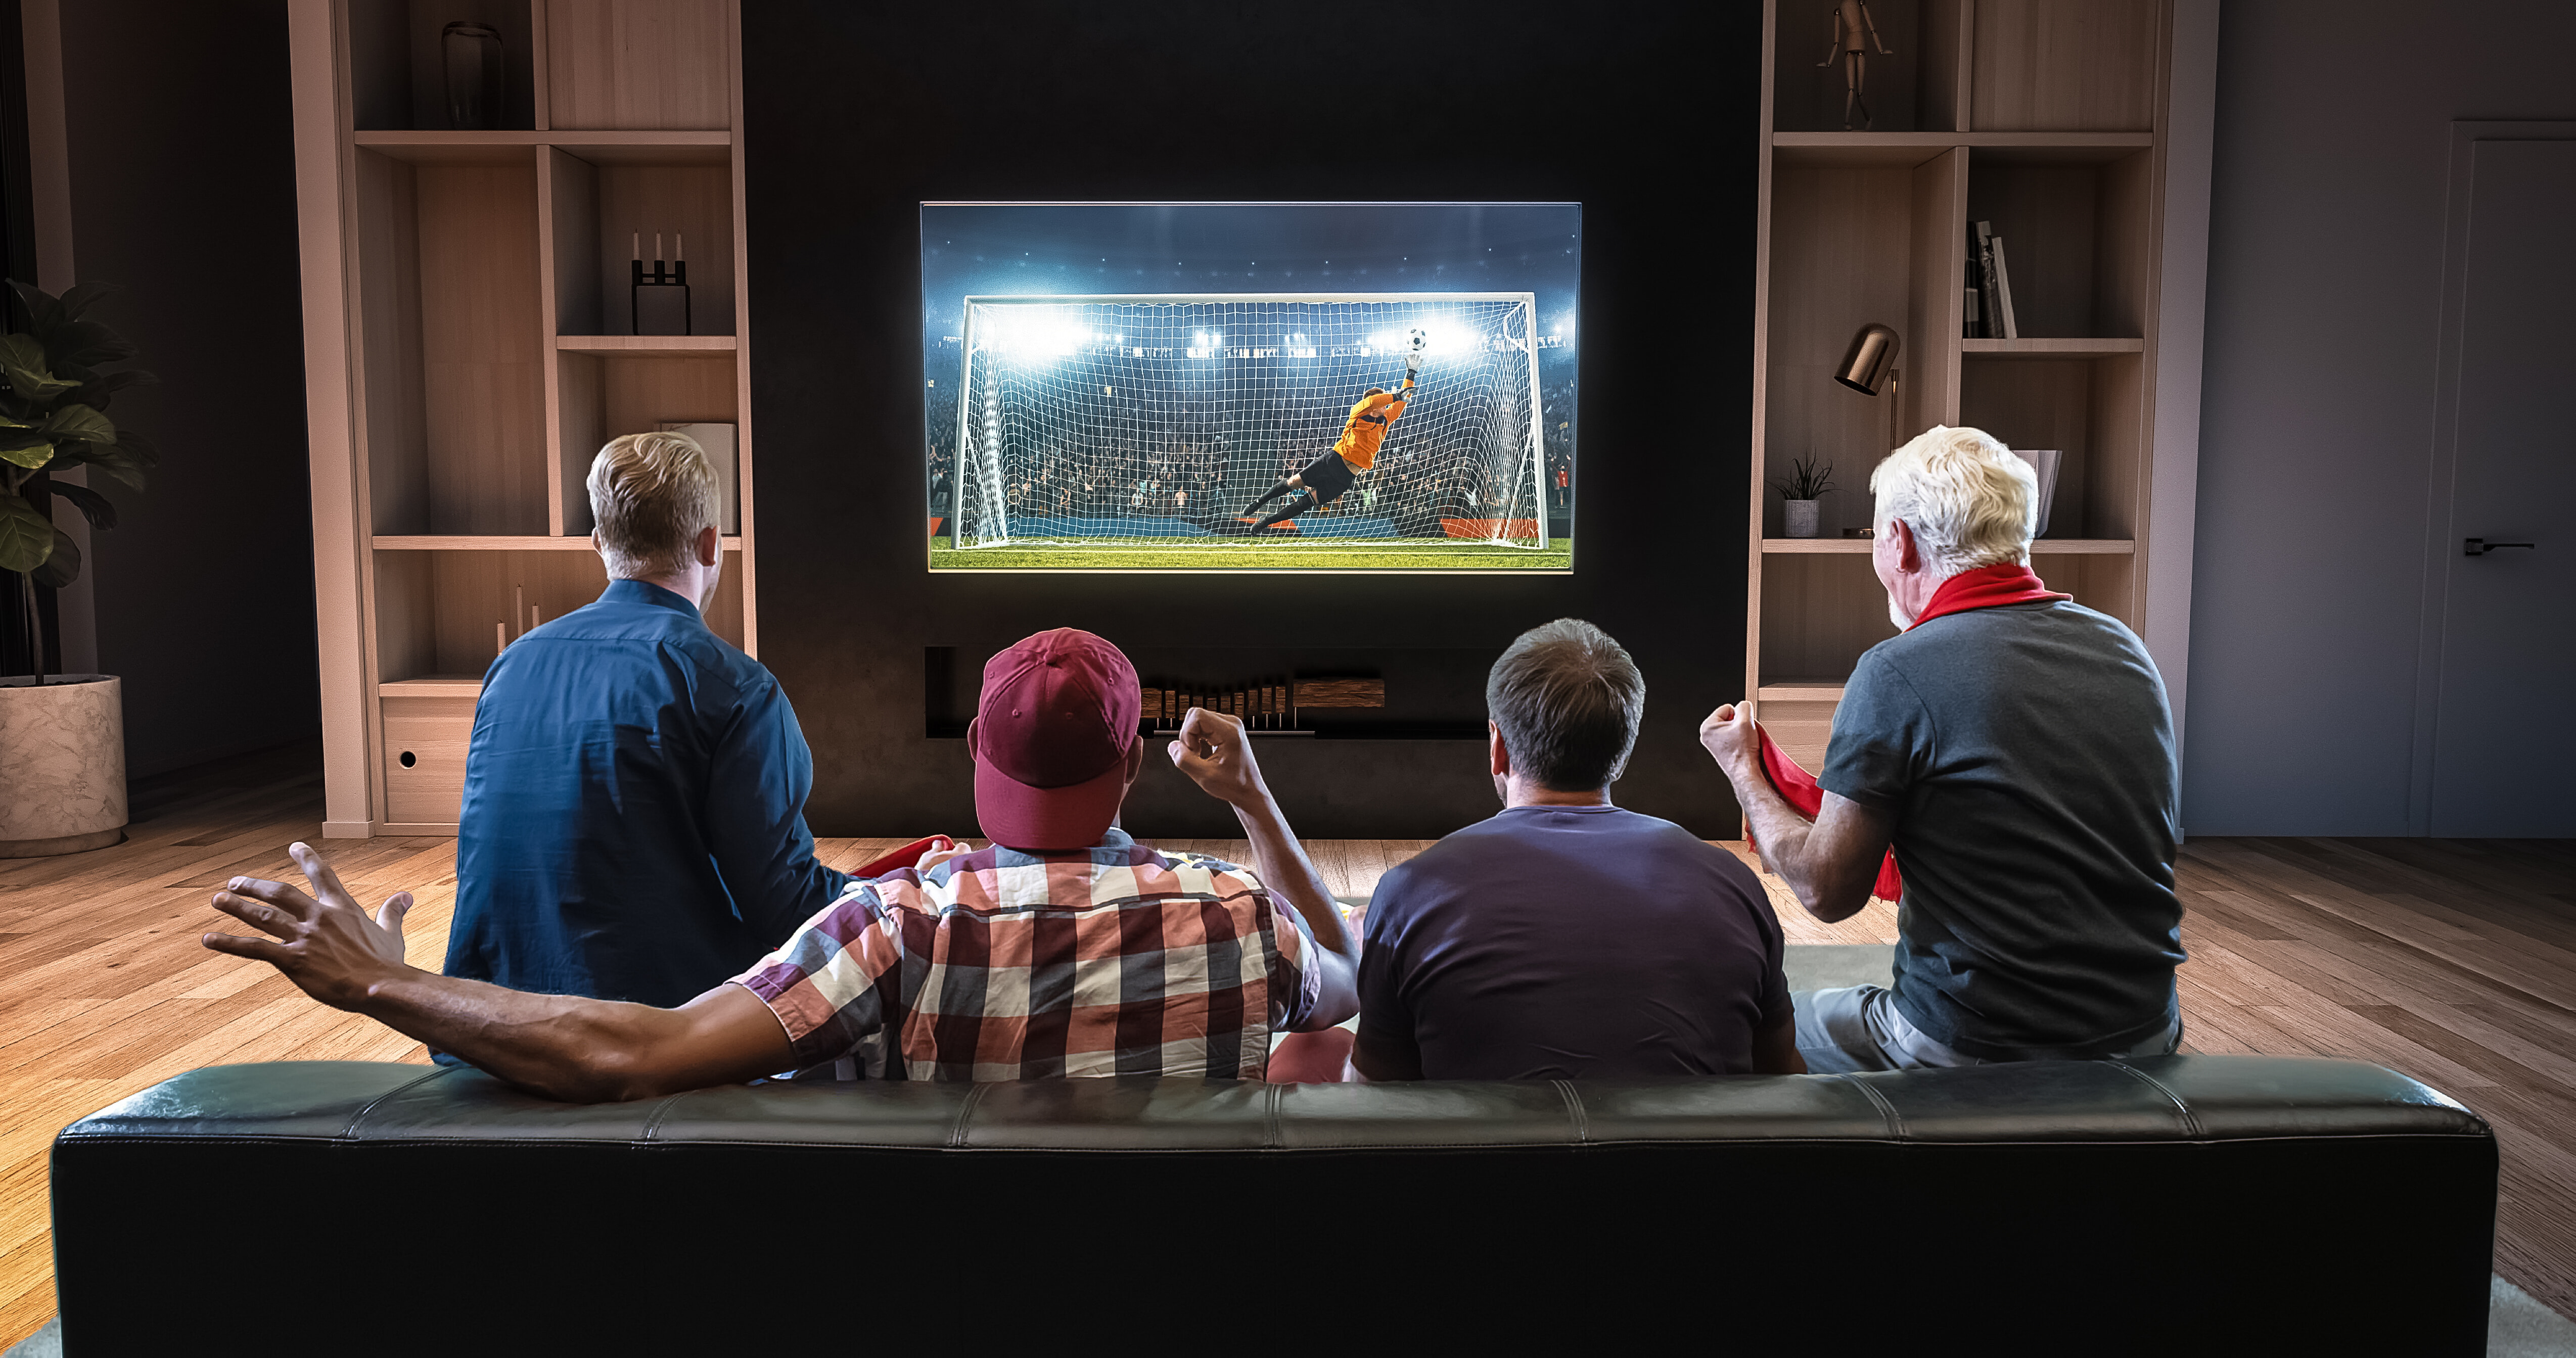 Group of fans watching a soccer moment on the TV and celebrating a goal, sitting on the couch in the living room